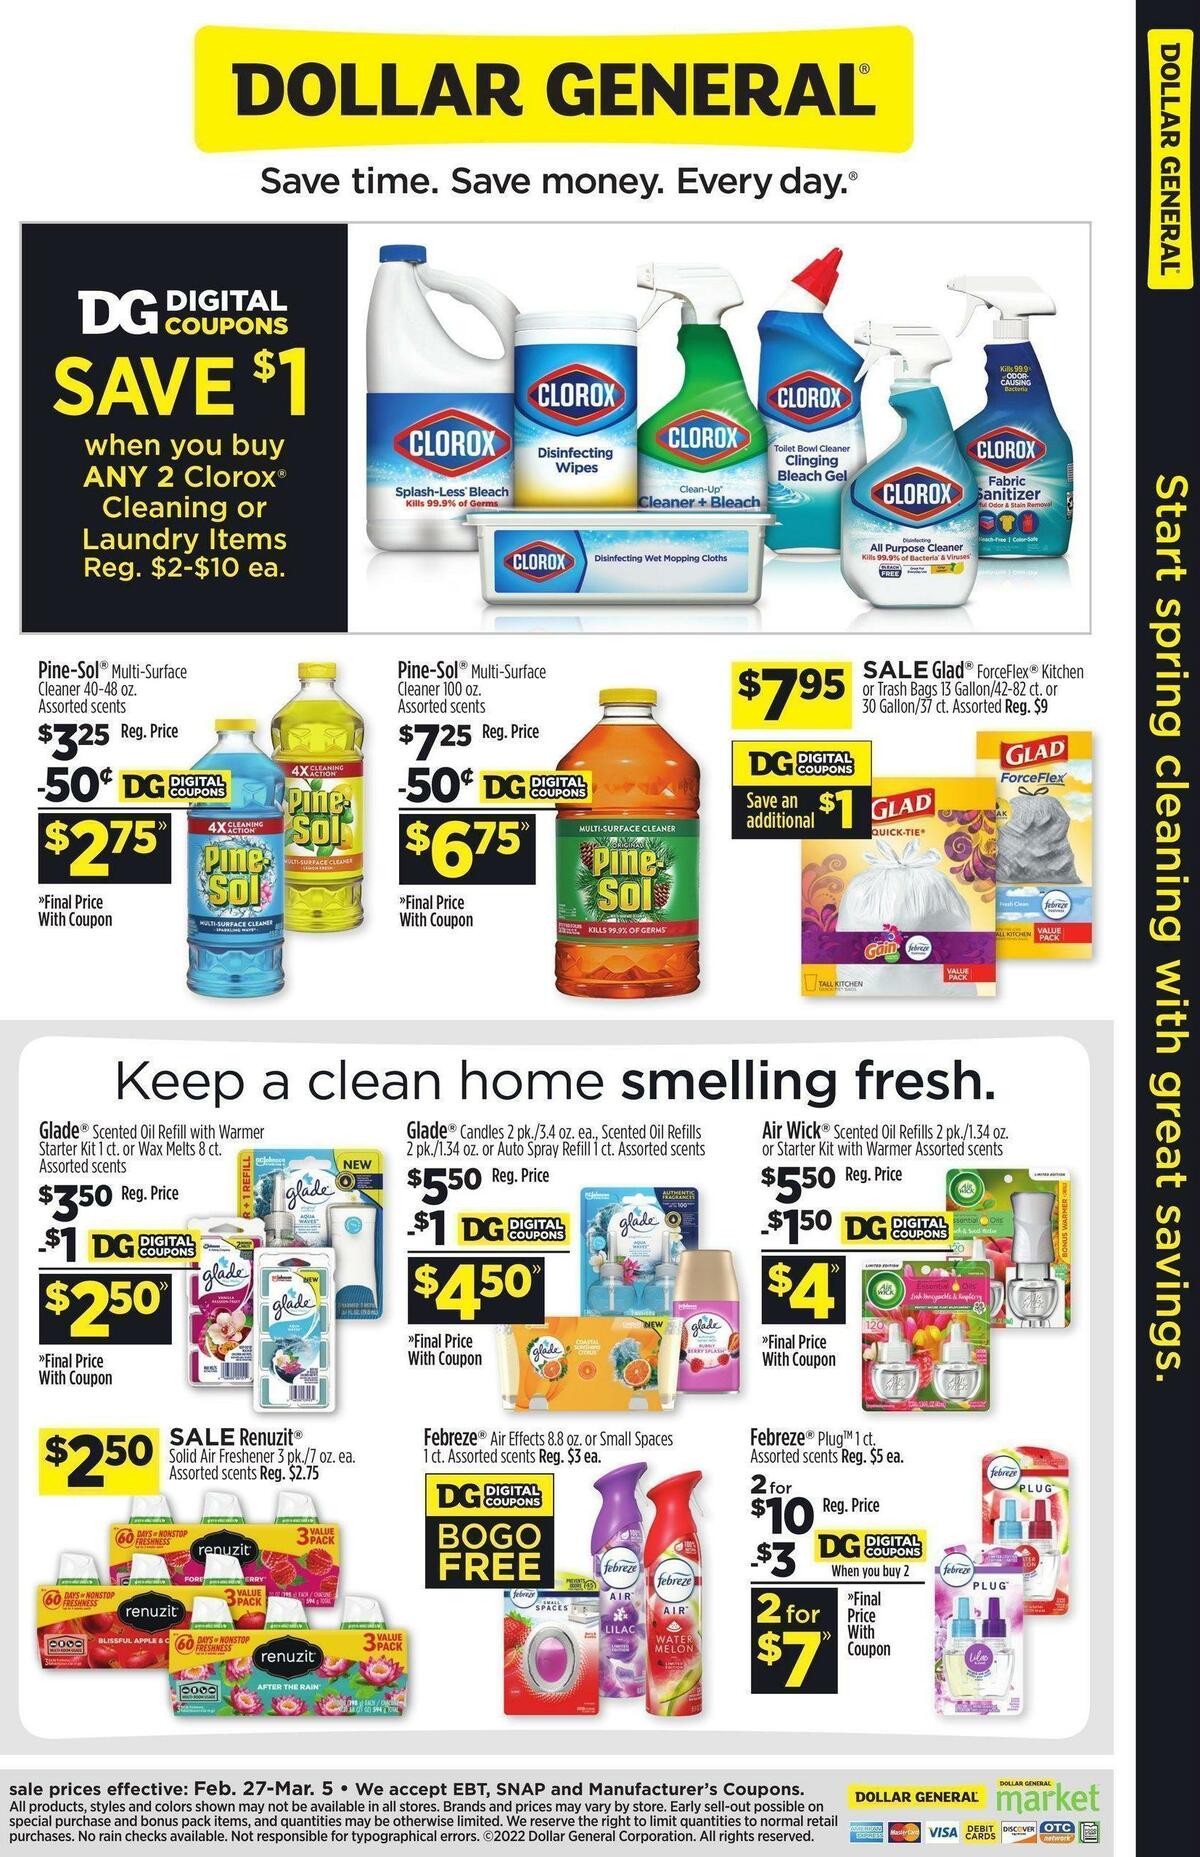 Dollar General Cleaning Deals Weekly Ad from February 27